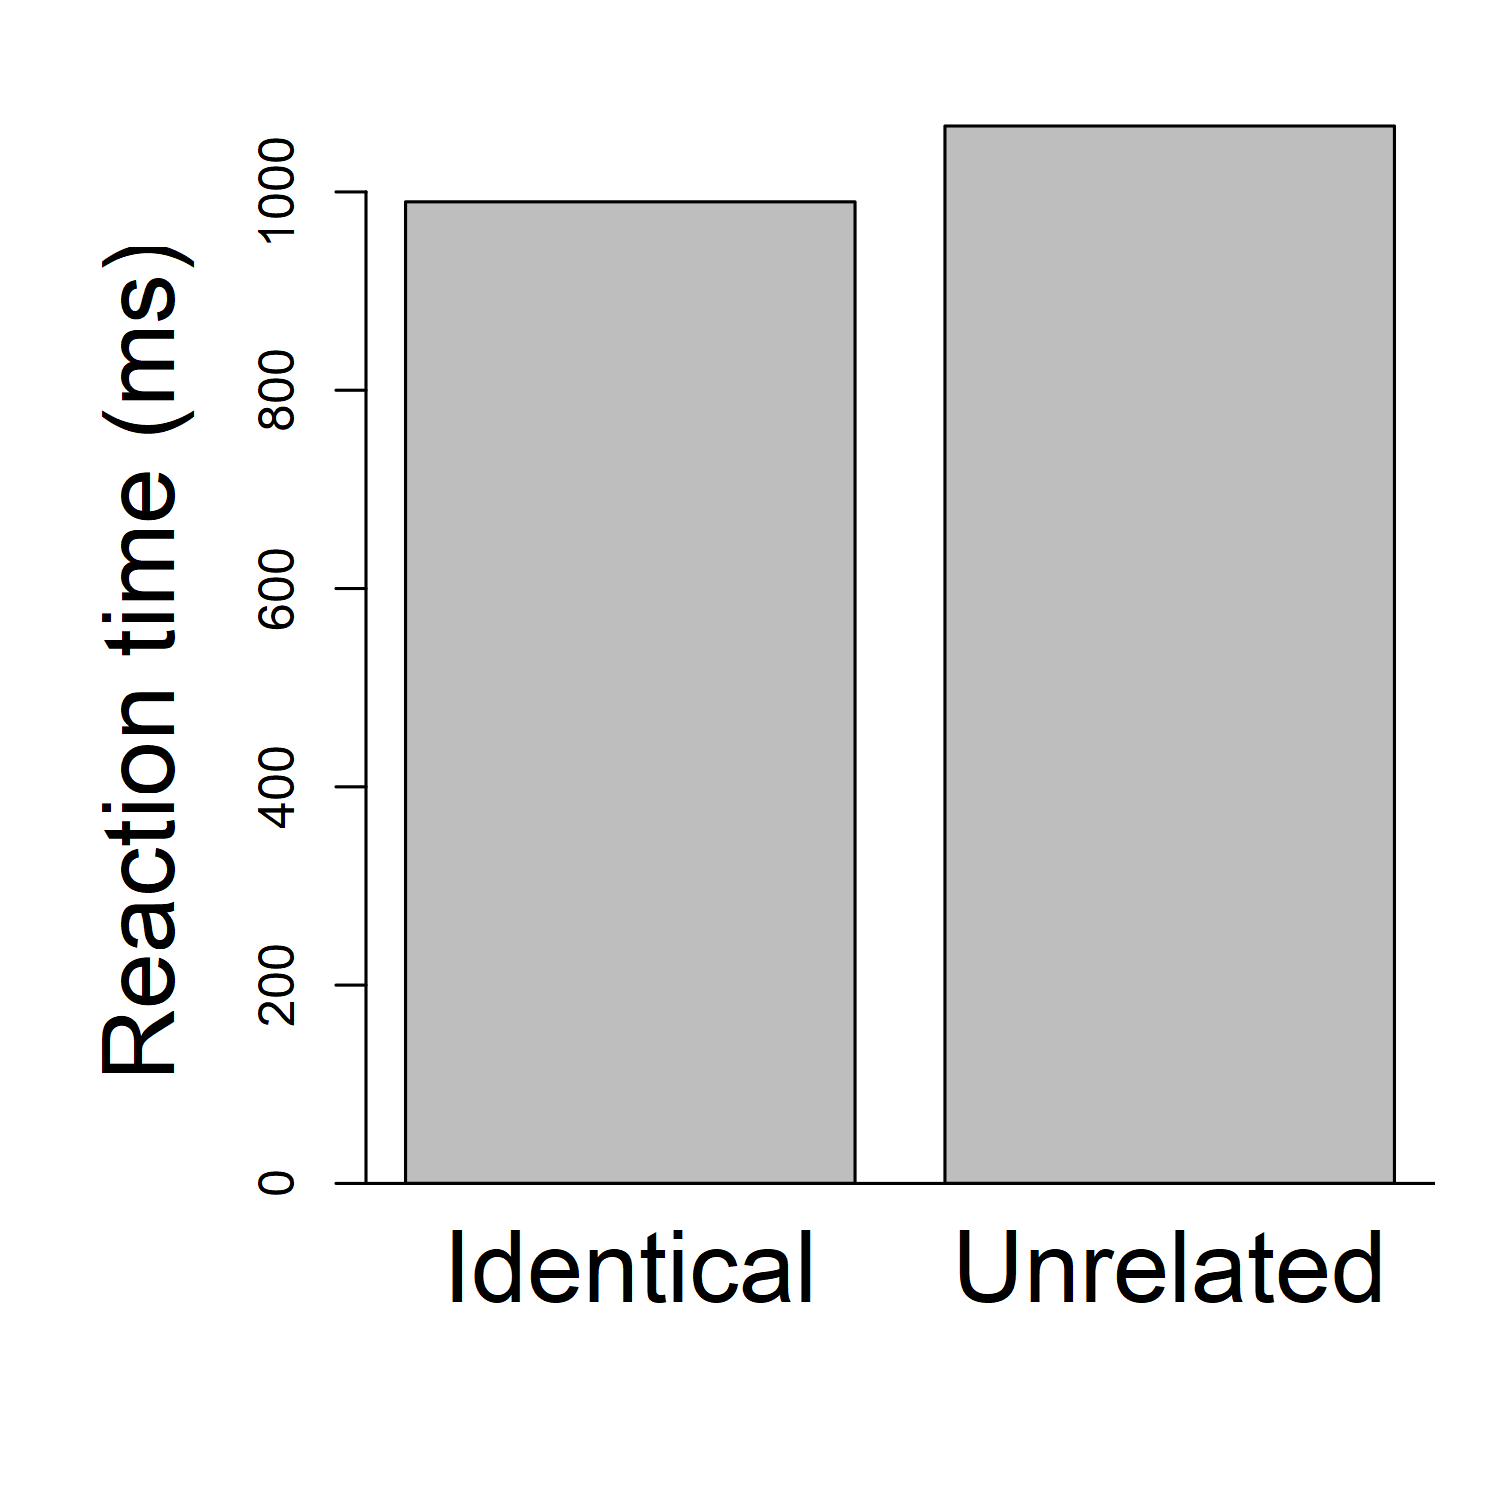 Bar plot showing reaction times in a priming experiment. The y-axis indicates reaction time, in milliseconds. Along the x-axis there are two vertical bars. The first bar is labelled "Identical" and extends up to 990 ms. The second bar is labelled "Unrelated" and extends up to 1066.5 ms.